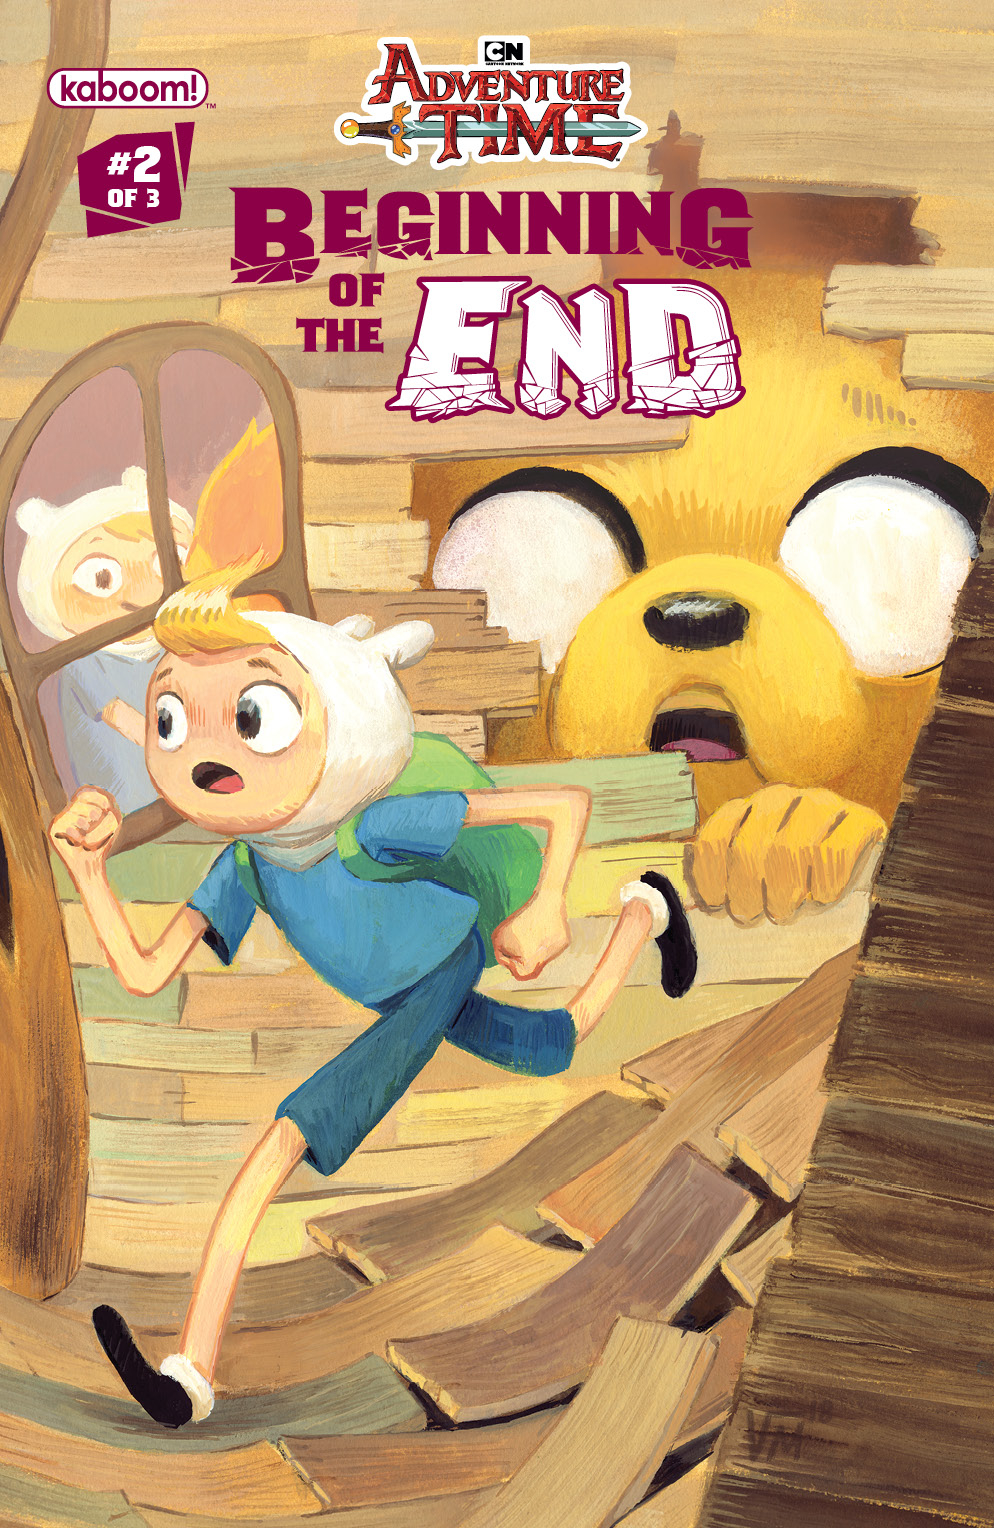 ADVENTURE TIME BEGINNING OF END #2